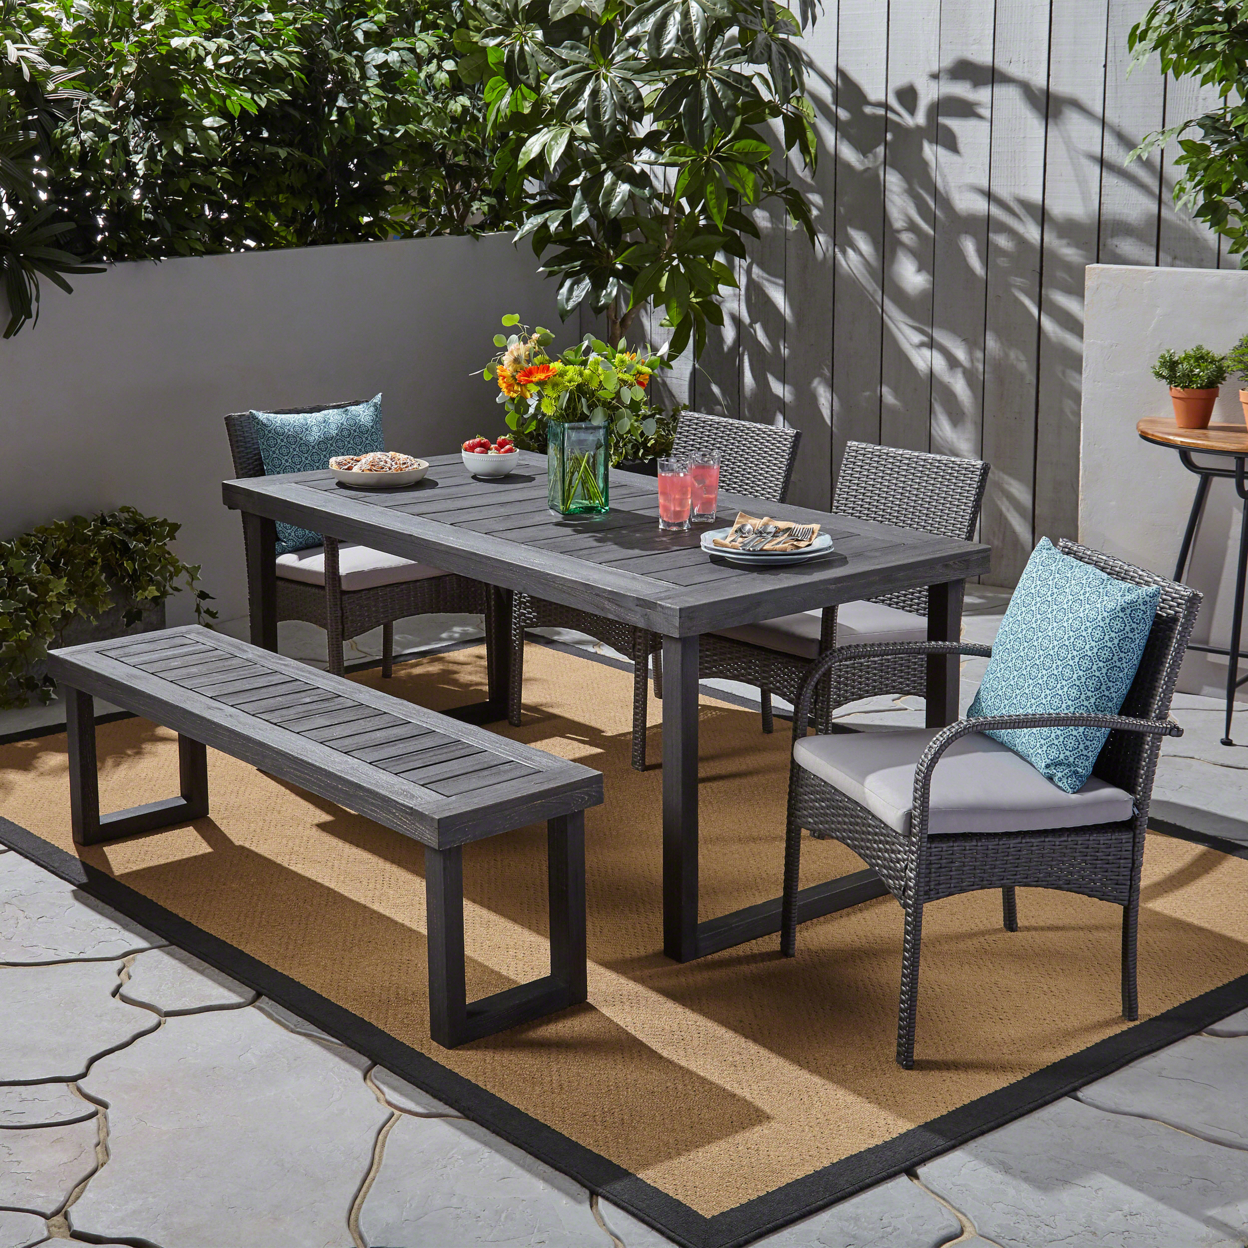 Anemone Outdoor 6-Seater Wood And Wicker Chair And Bench Dining Set - Sandblast Dark Grey + Gray